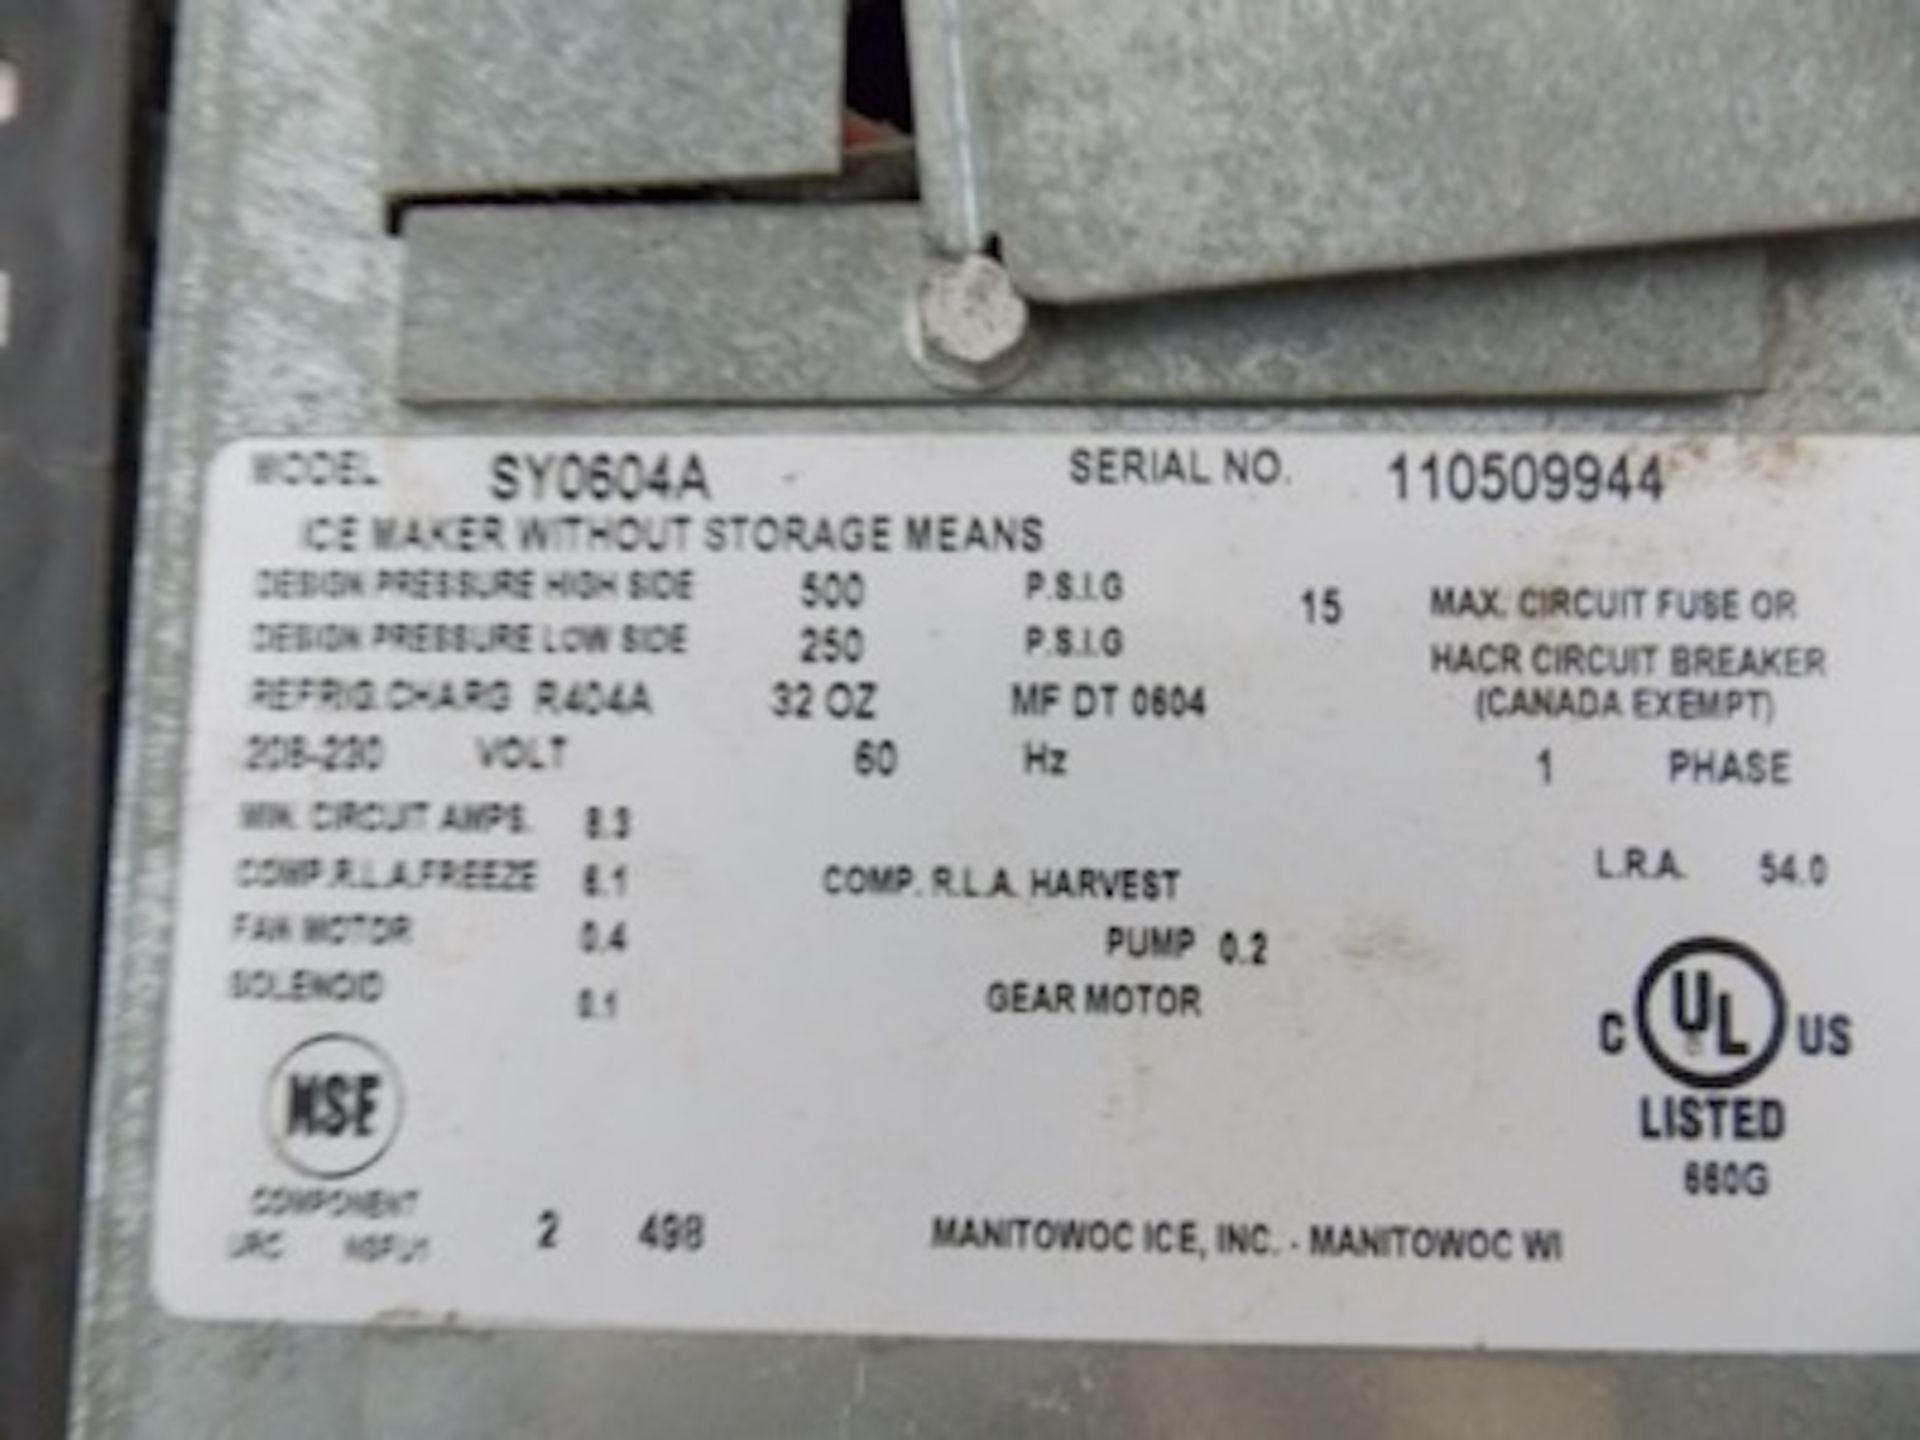 Maitowoc mod. SY0604A Ice Maker, 208/230 Volts; S/N 110509944 - Image 2 of 3